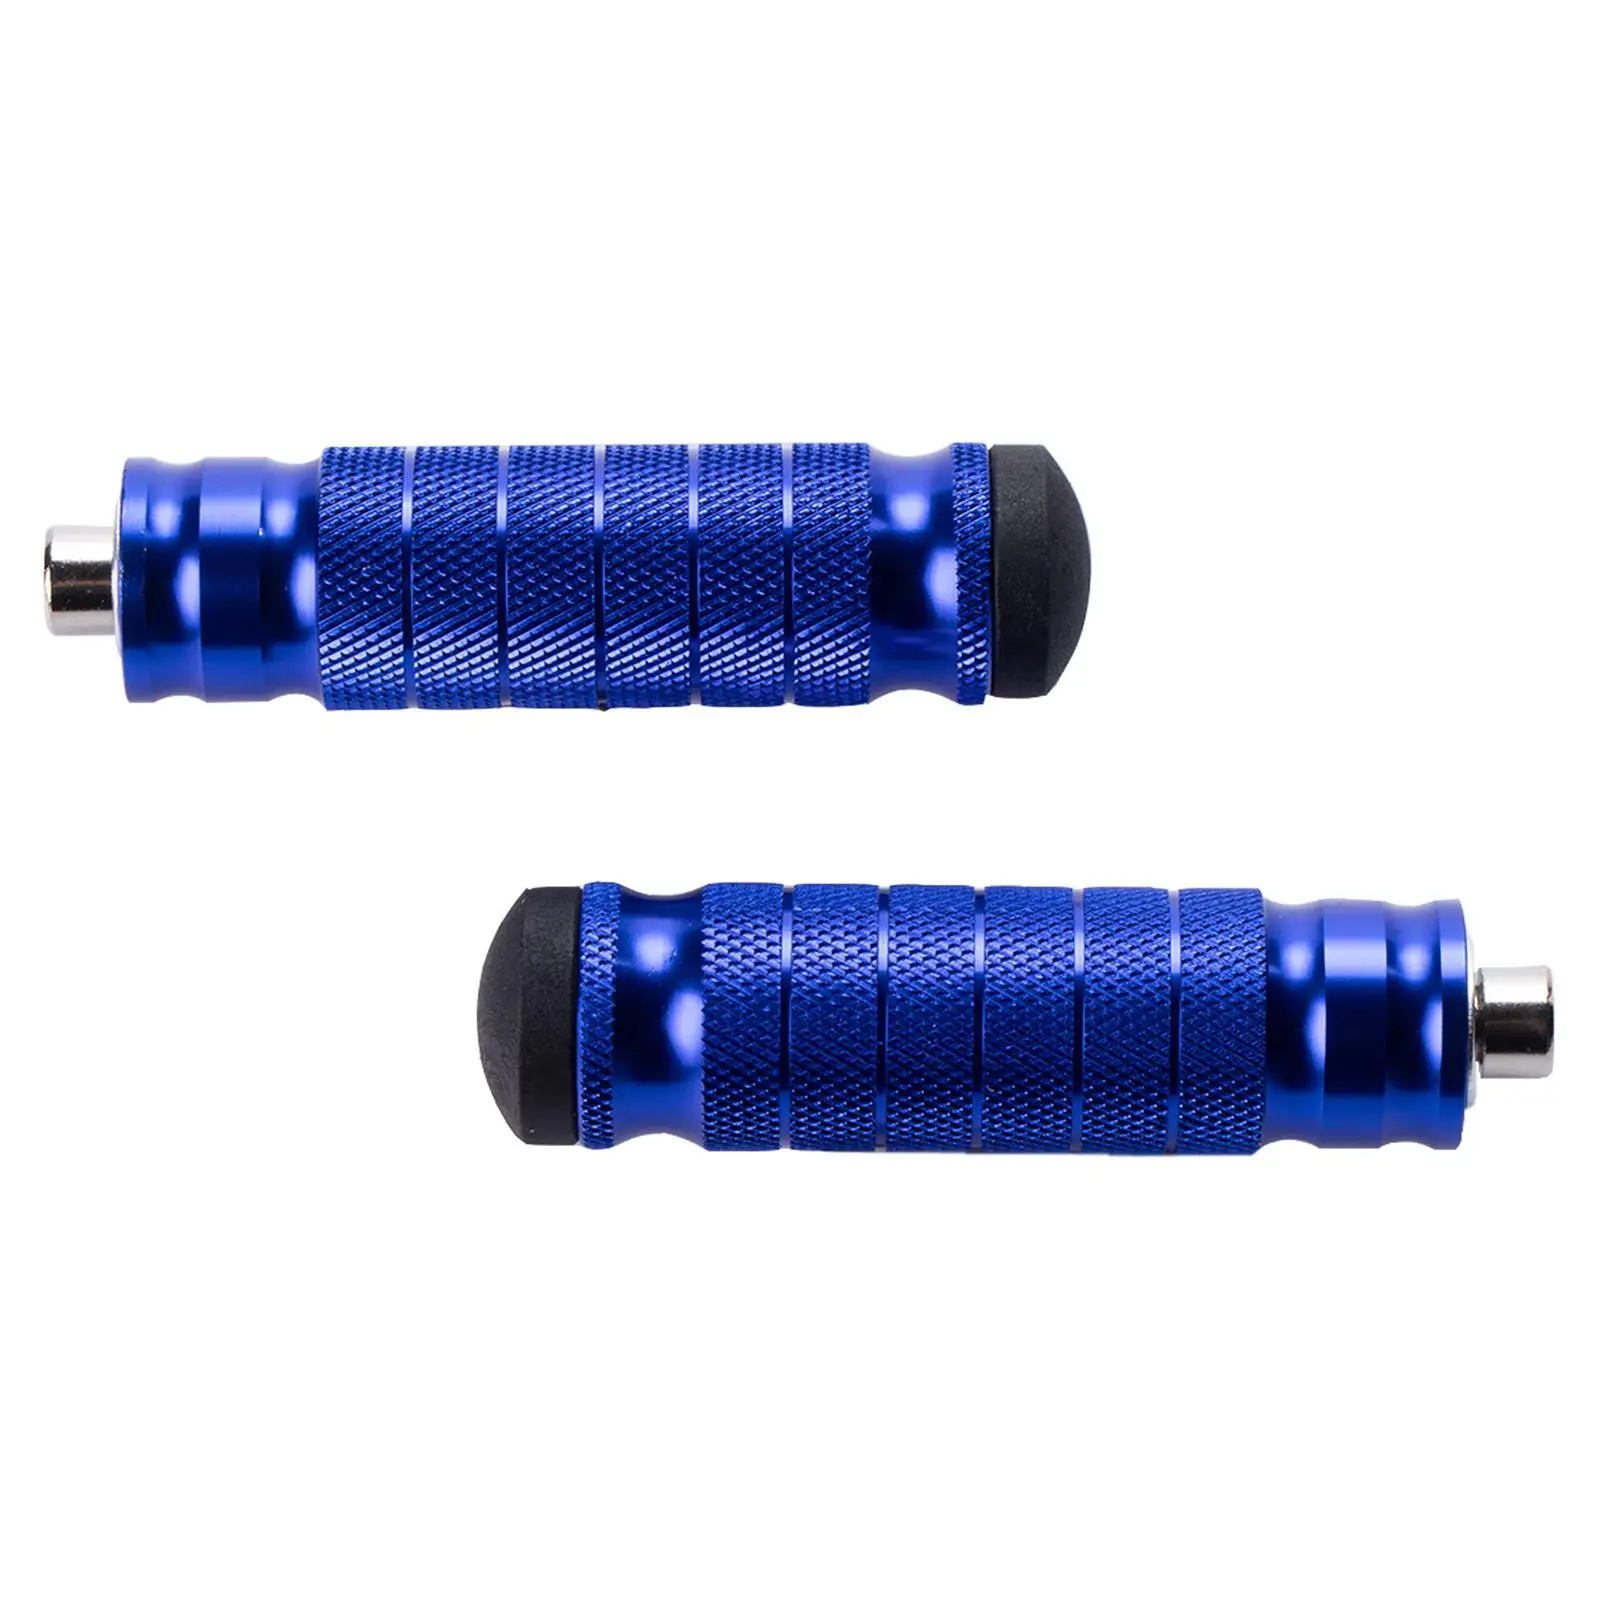 2Pcs Motorcycle Rear Footrests 8mm Bolts Anti Skid Easy Installation Universal Aluminum Accessories Replacement Parts Foot Peg